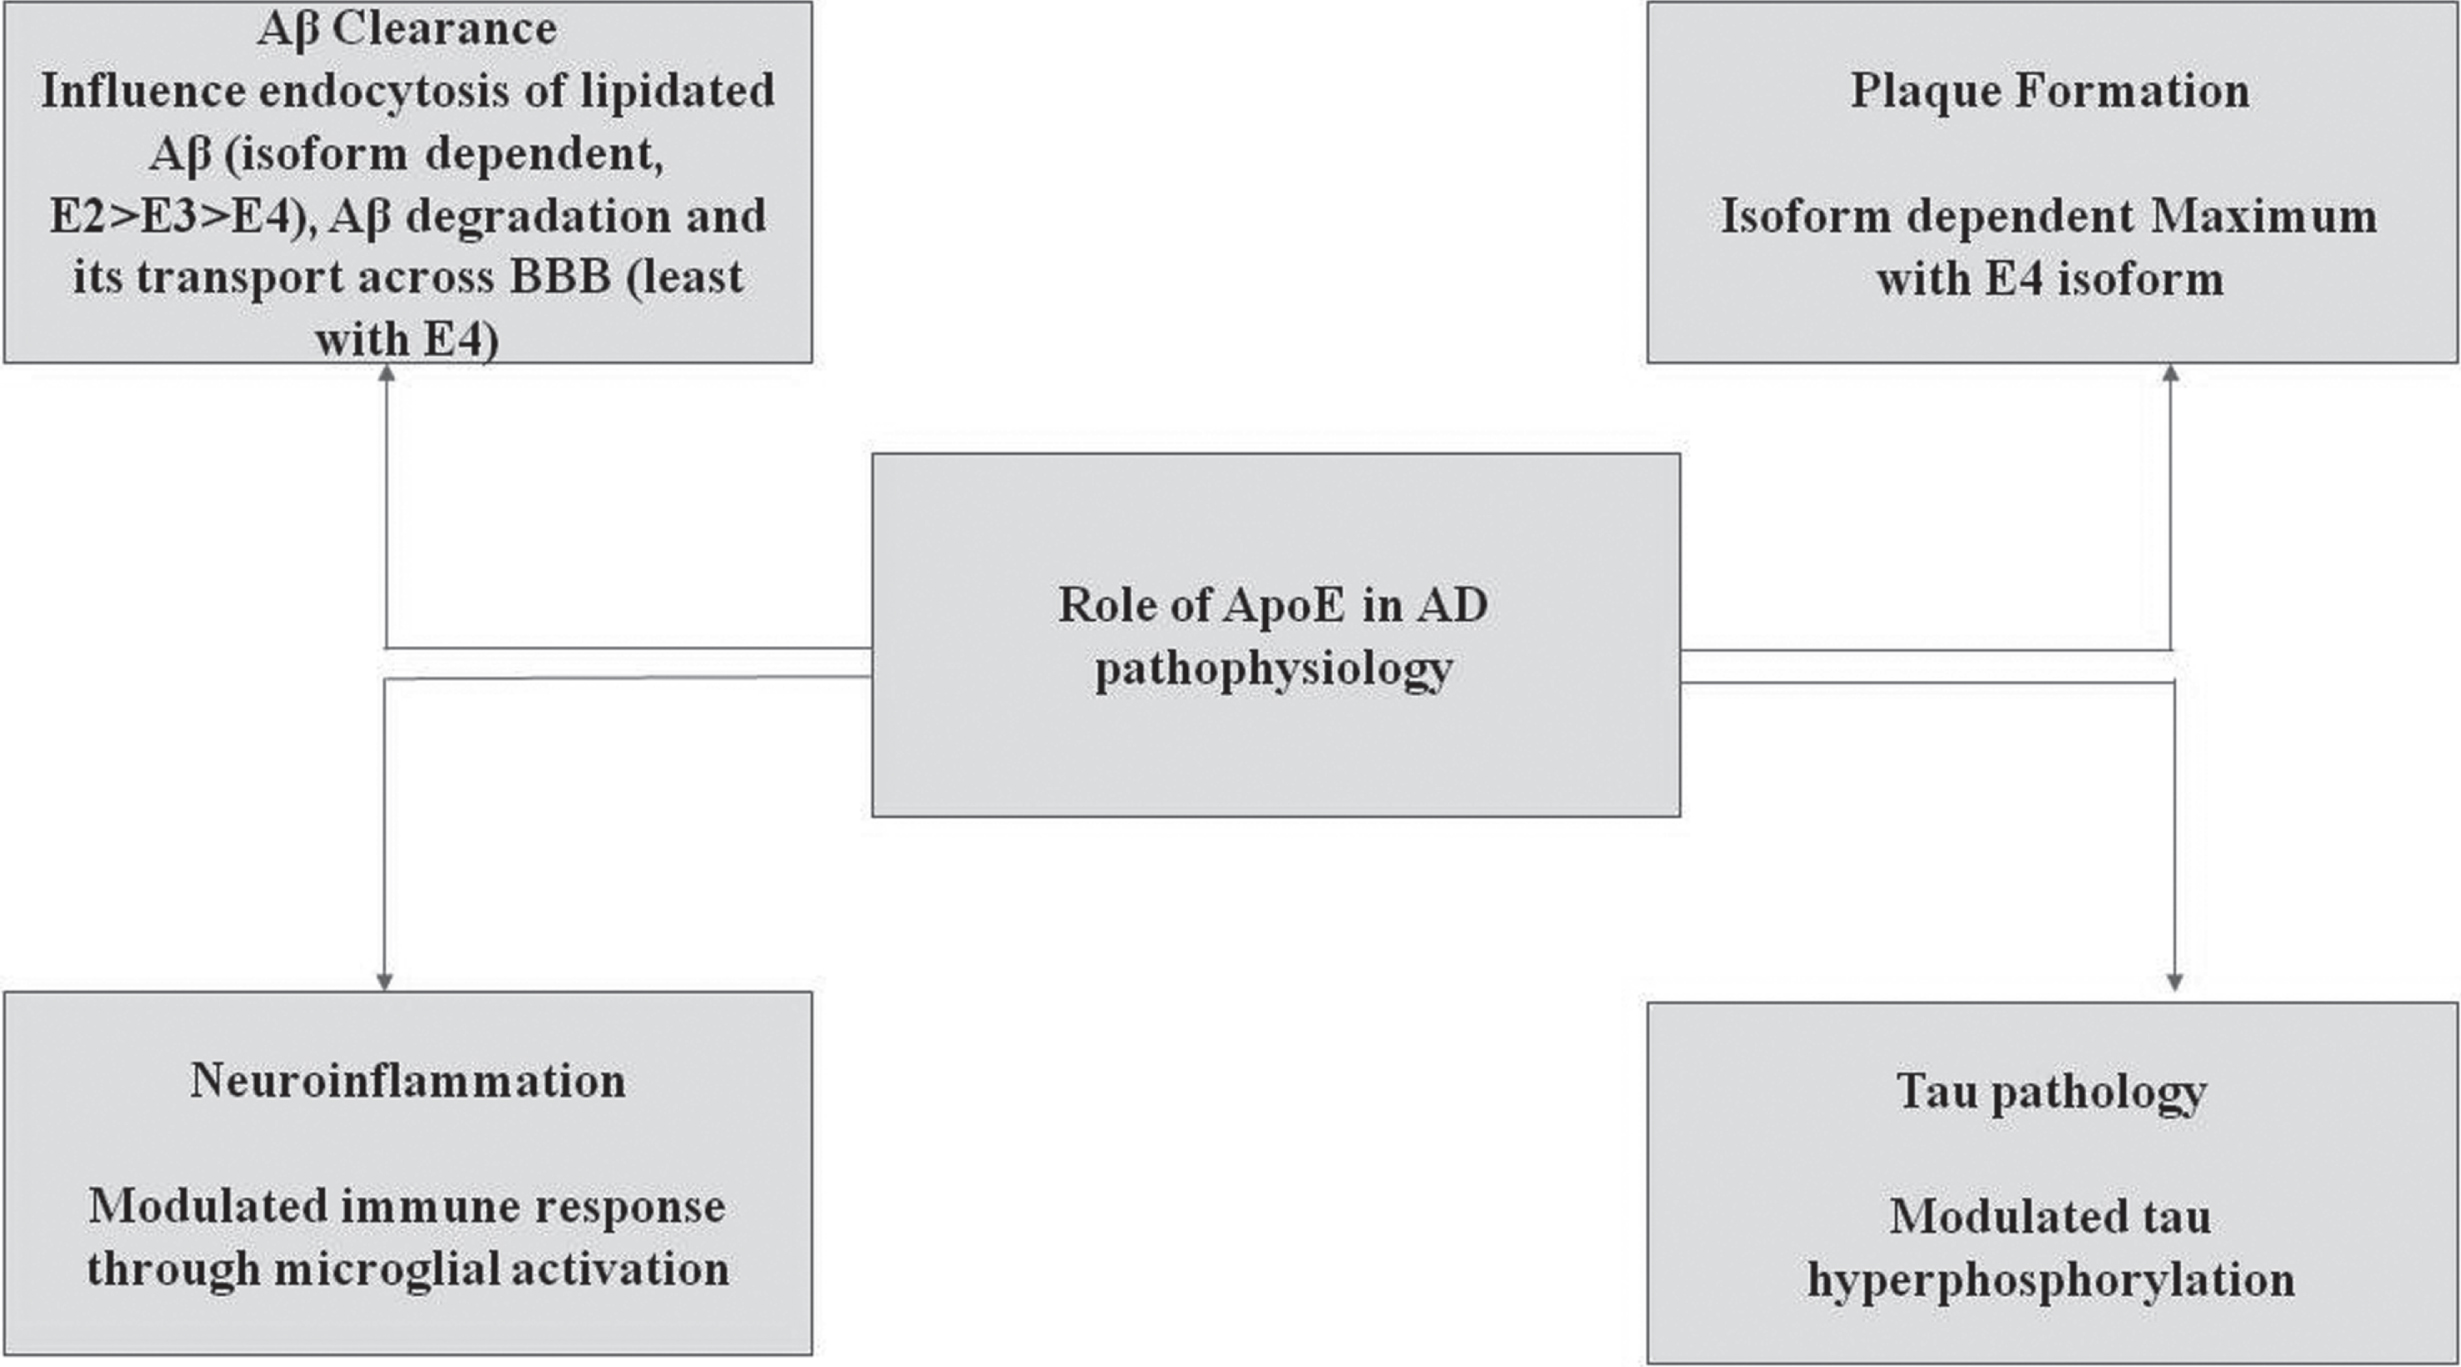 ApoE4 plays a key role in AD pathophysiology [24]. As mentioned above, ApoE4 is inefficient as compared to other isoforms in clearing Aβ. As ApoE4 fails to clear the accumulation and triggering the over-production of Aβ by increasing the activity of γ-secretase, it eventually leads to the formation of plaques. C) ApoE4 increases the neuroinflammation by elevating the production of cytokines through the microglial activation. D) ApoE4 also plays a significant role in inducing the hyperphosphorylation of tau through ERK activation.